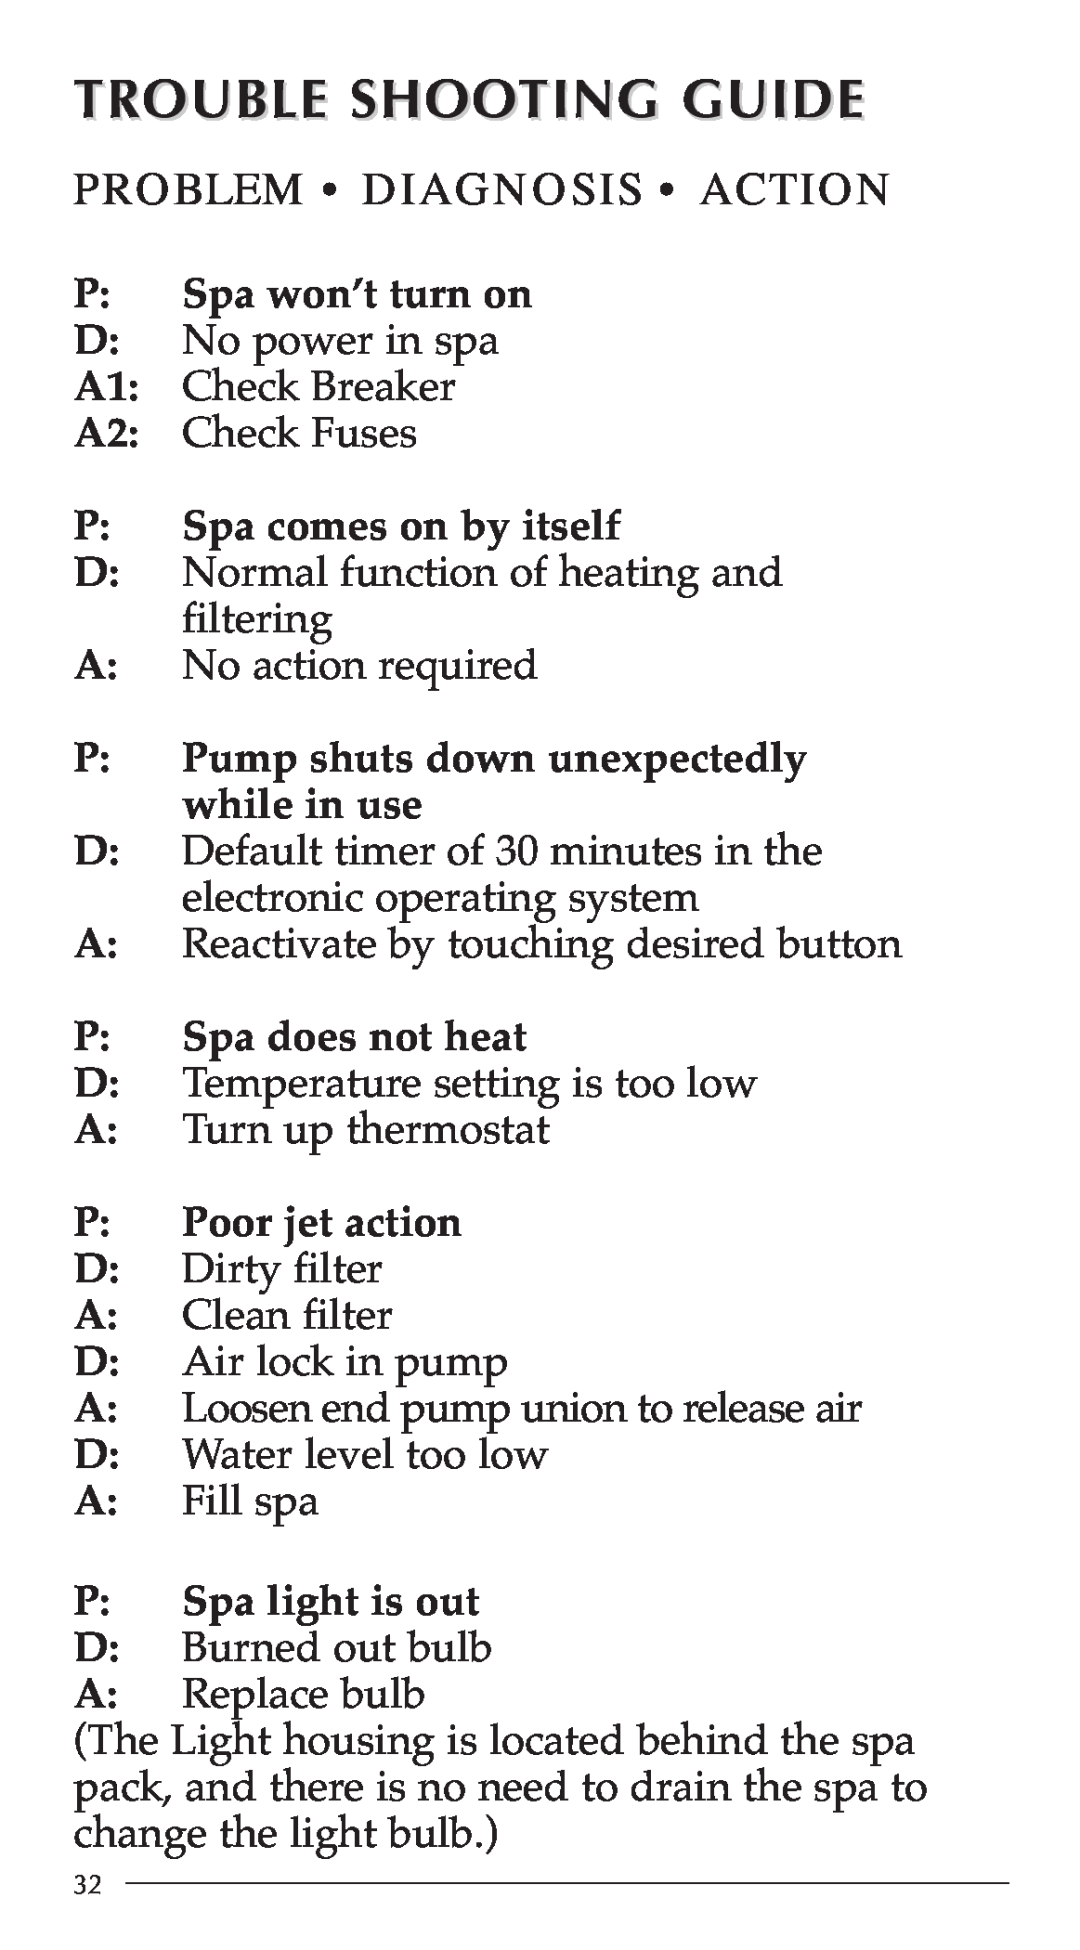 Aruba Spa 2003 Breeze Trouble Shooting Guide, Problem Diagnosis Action, P Spa won’t turn on, P Spa comes on by itself 